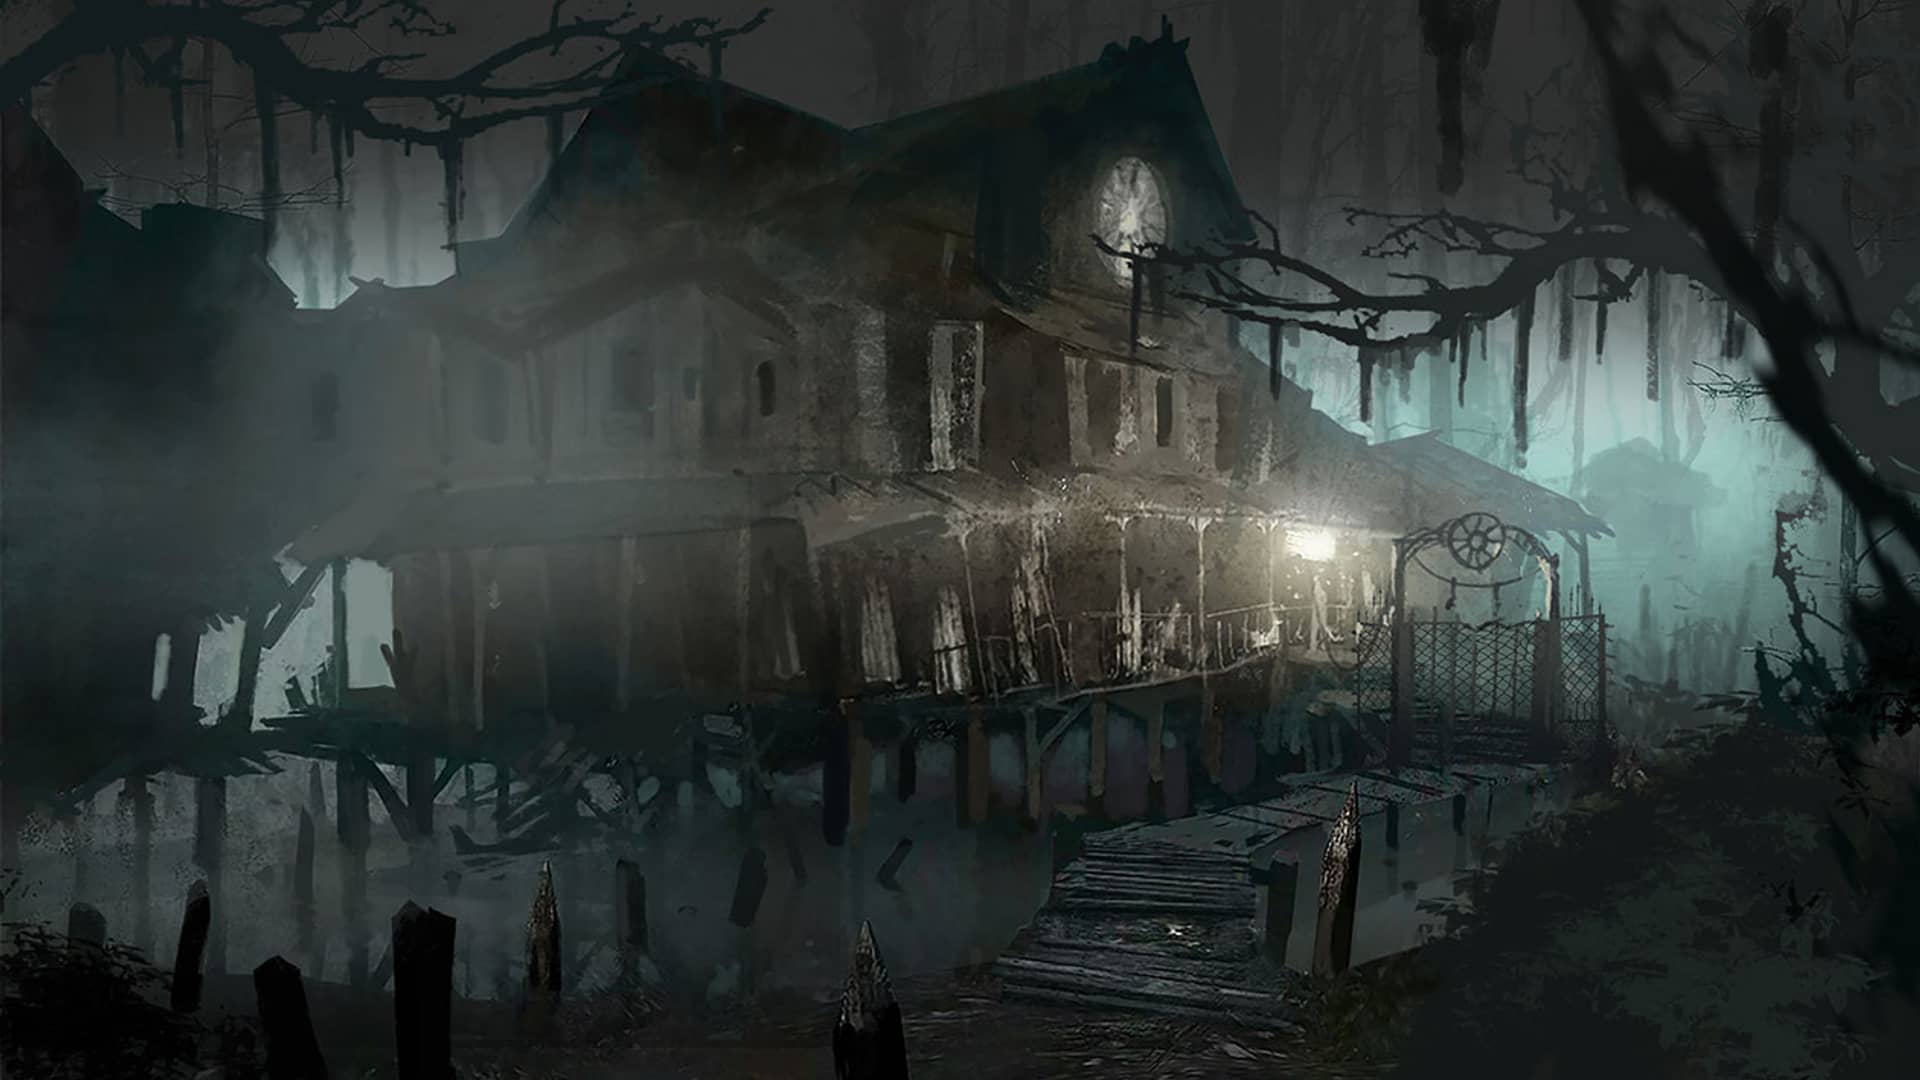 Image of the house from the game Resident Evil 7 which is one of the best scary games on the ps4